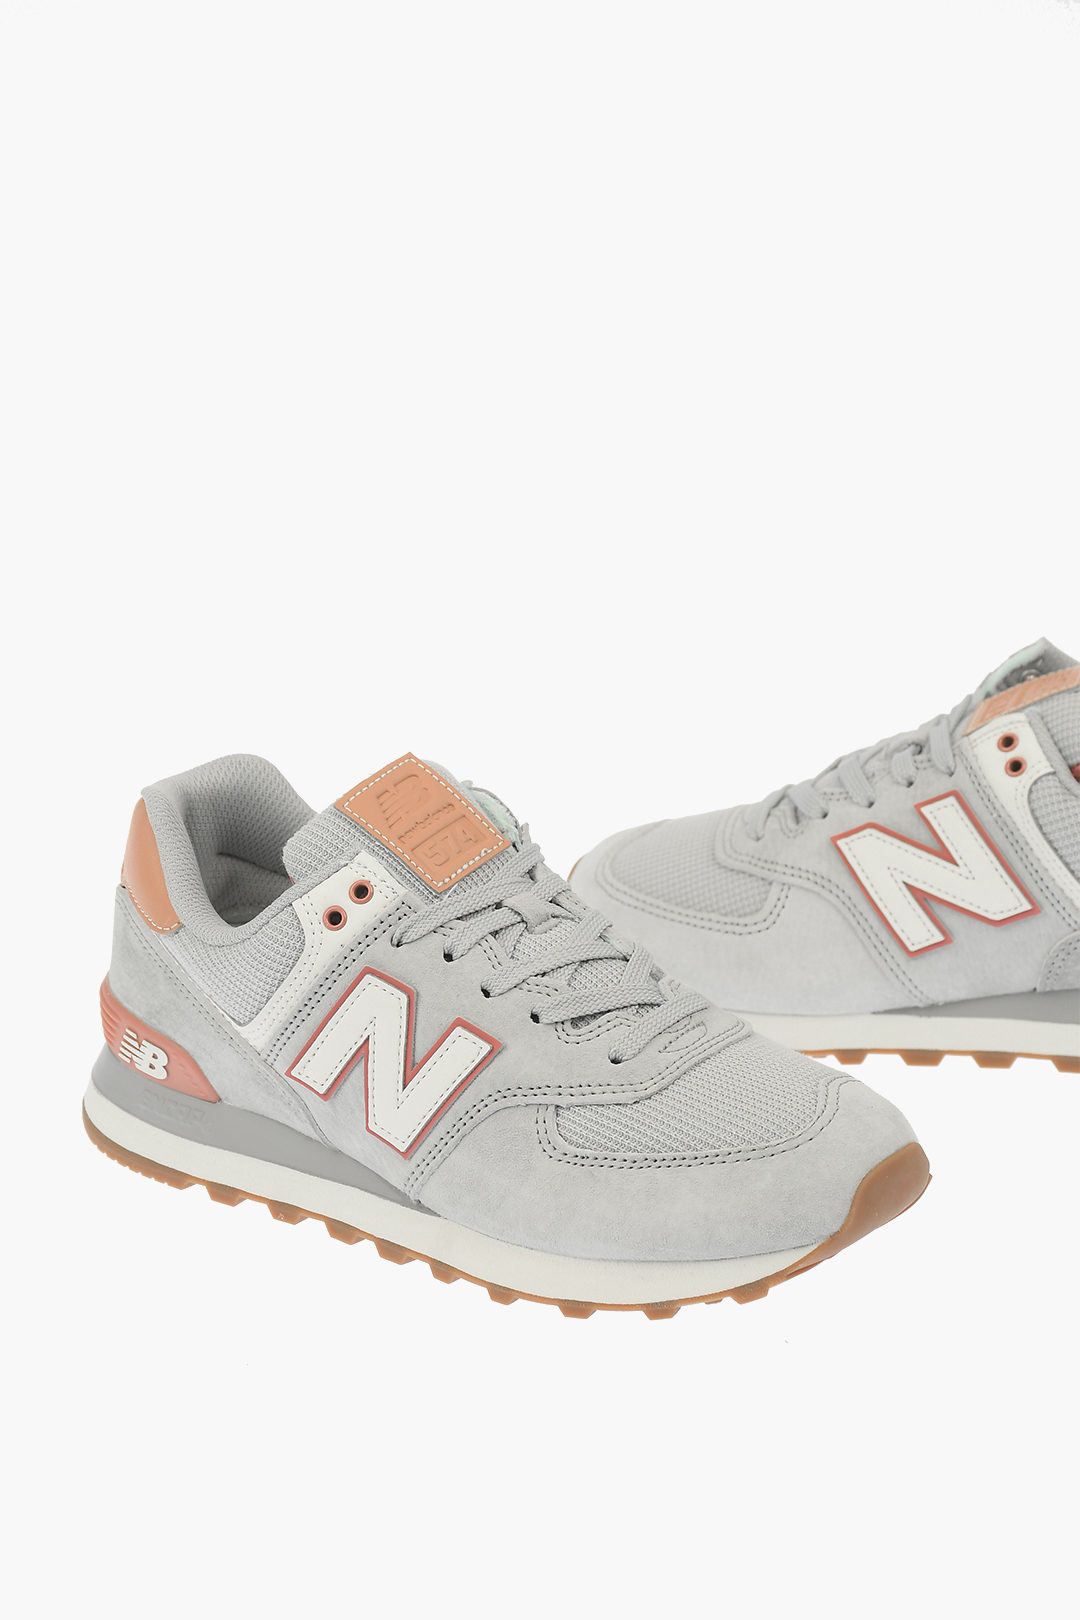 Al por menor Bañera Individualidad New Balance leather and Fabric 574 Sneakers women - Glamood Outlet